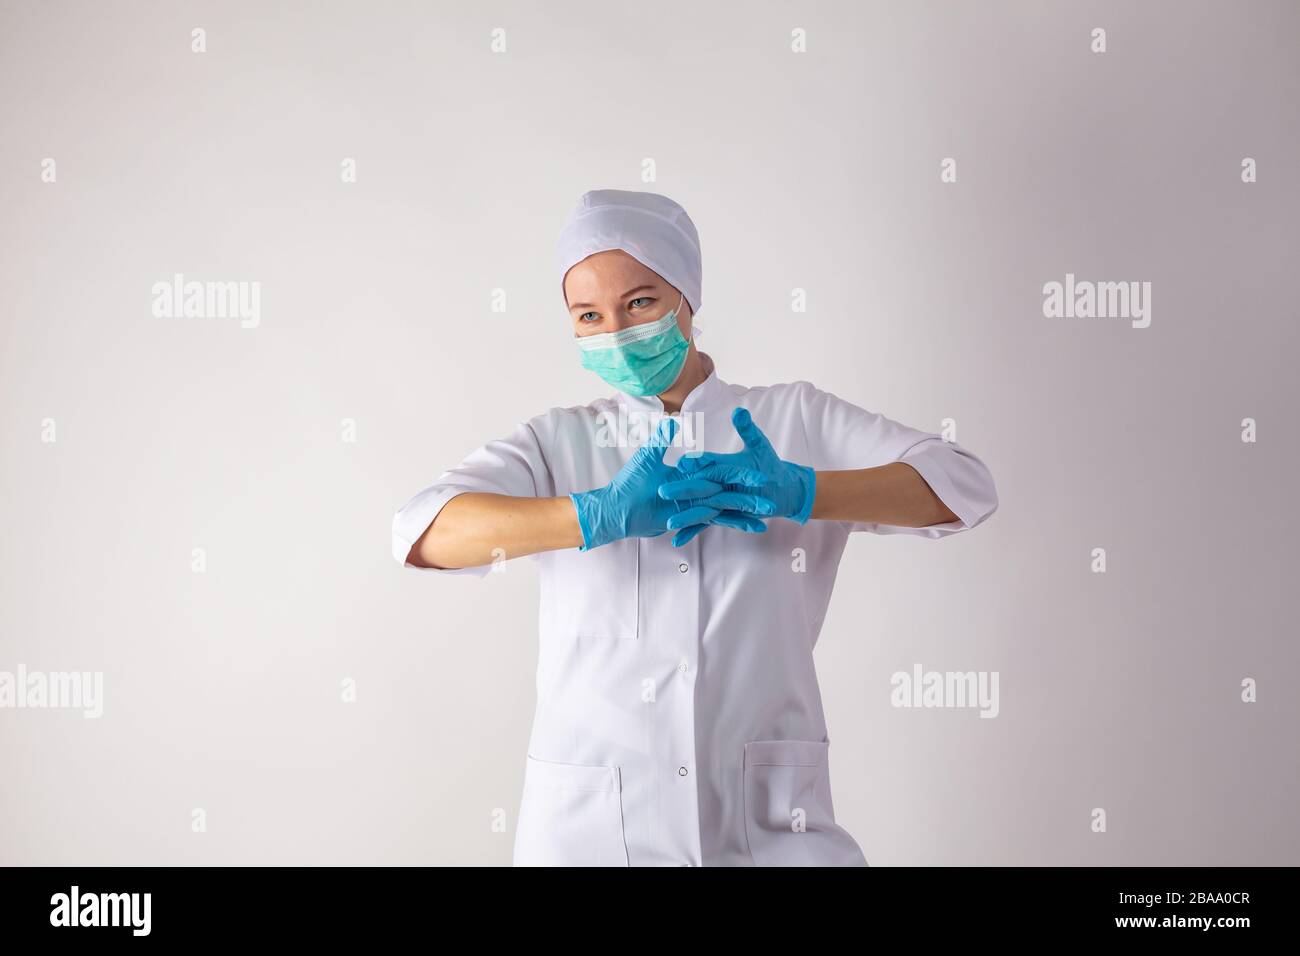 Cute girl on a monophonic background shows latex gloves. Stock Photo